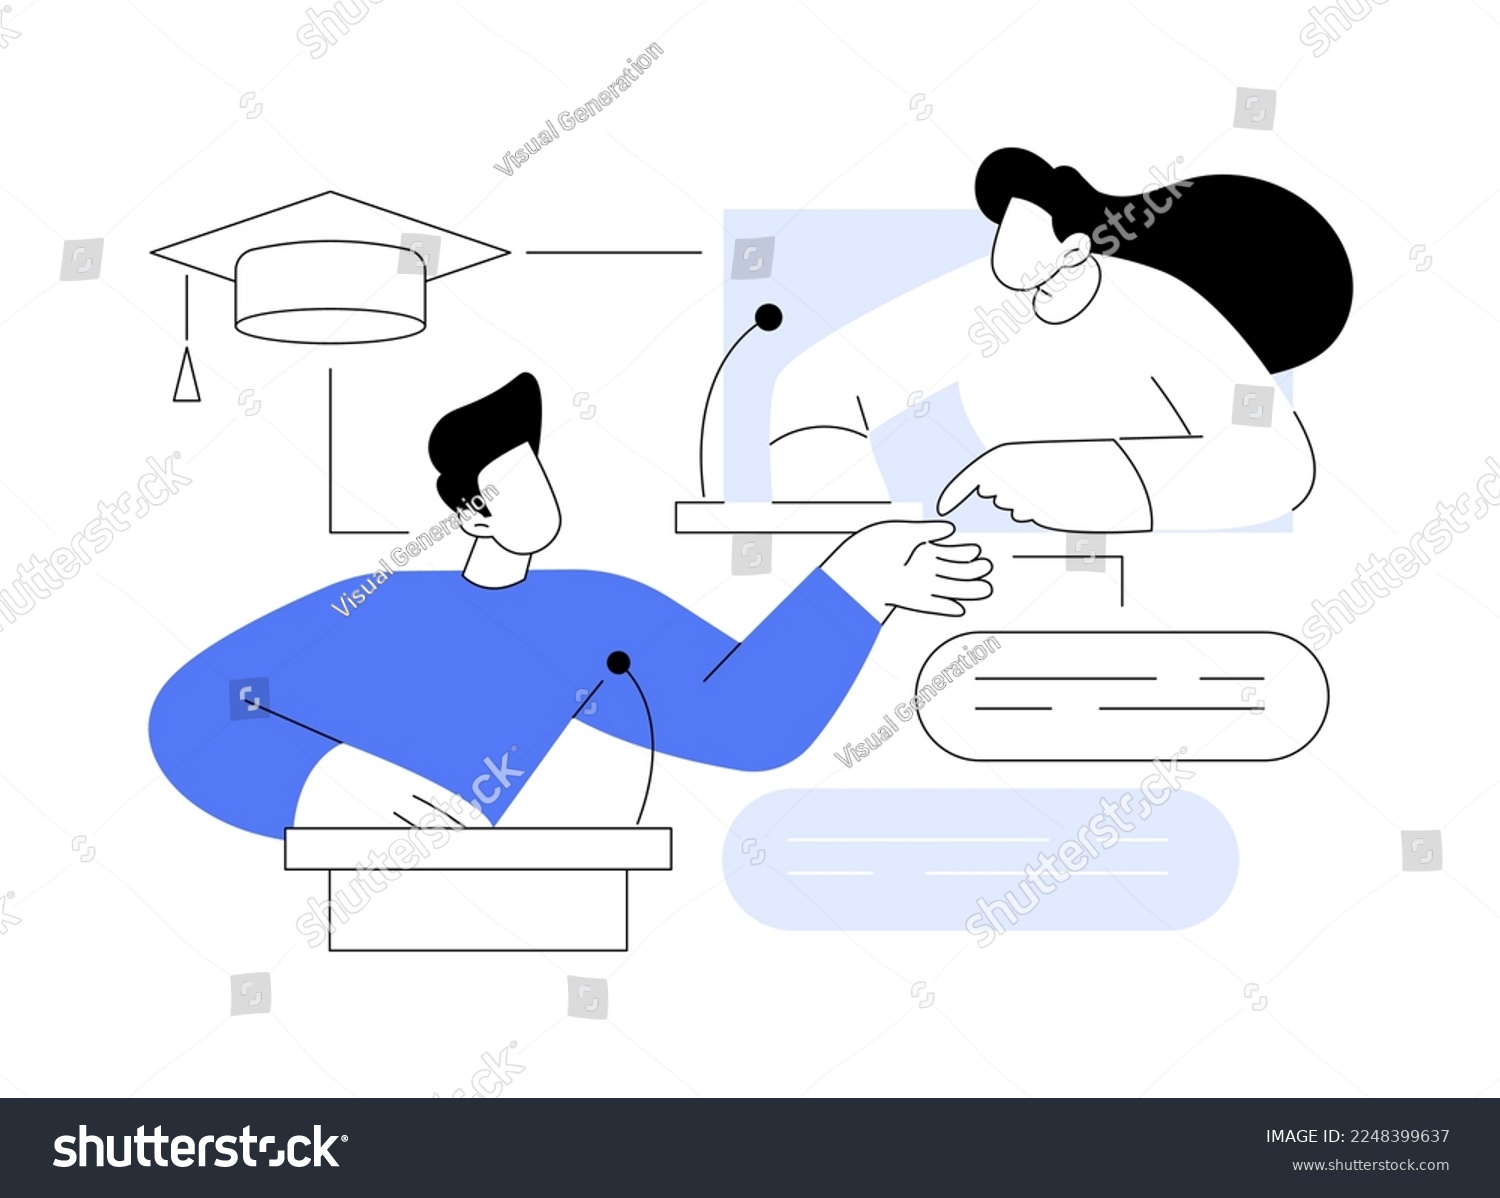 SVG of Debating club abstract concept vector illustration. Classroom debates, eloquent speech, debating competition, school club, public speaking class, effective communication skill abstract metaphor. svg